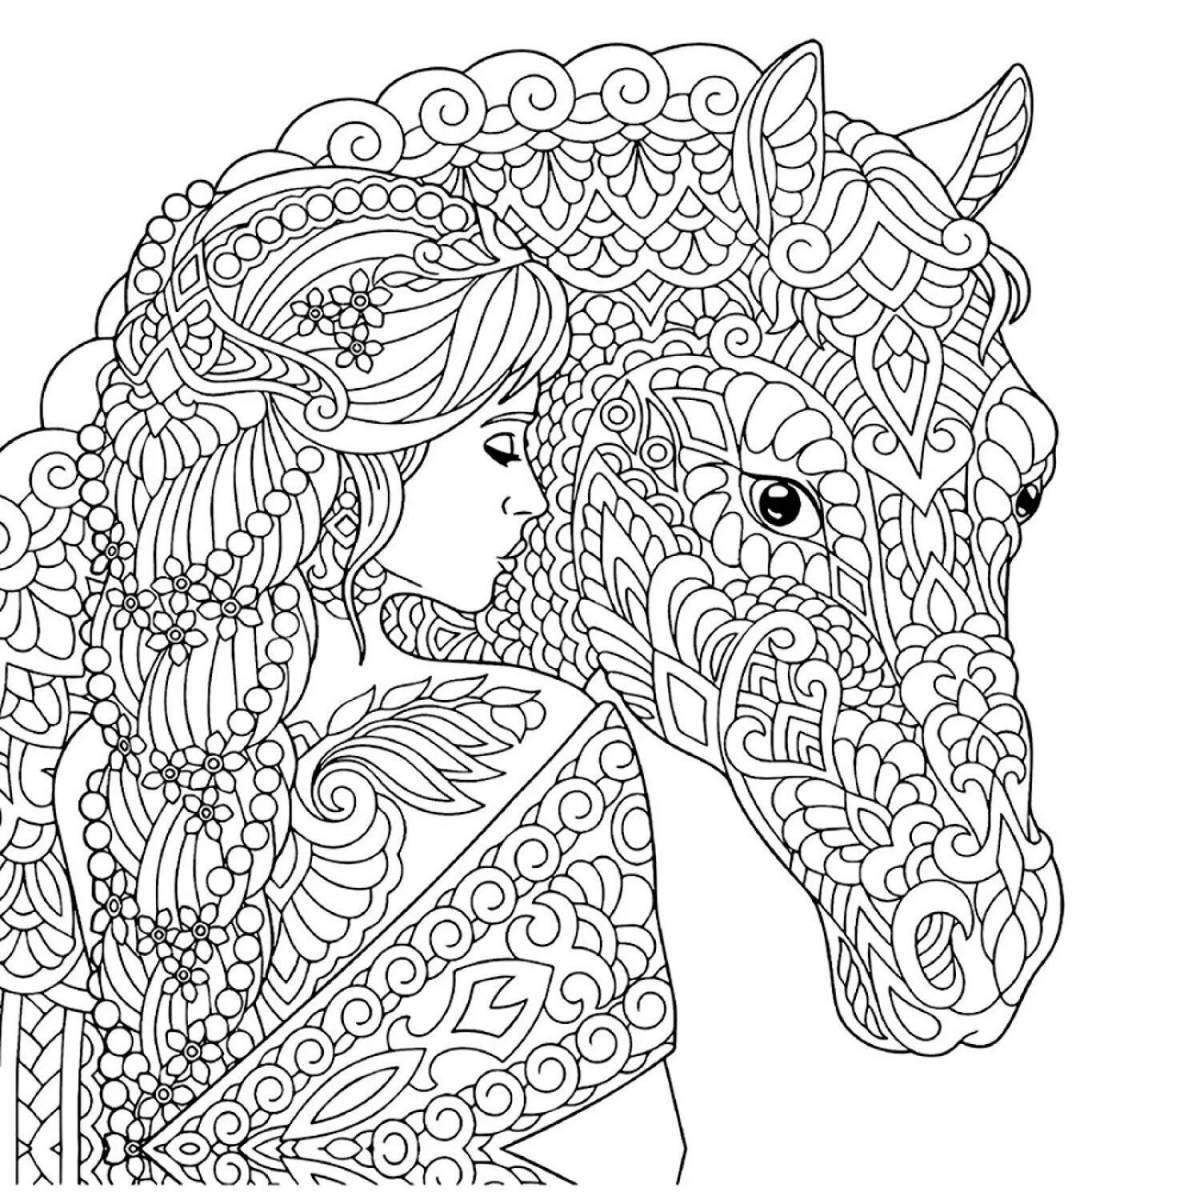 Relaxing anti-stress coloring book for adults 18